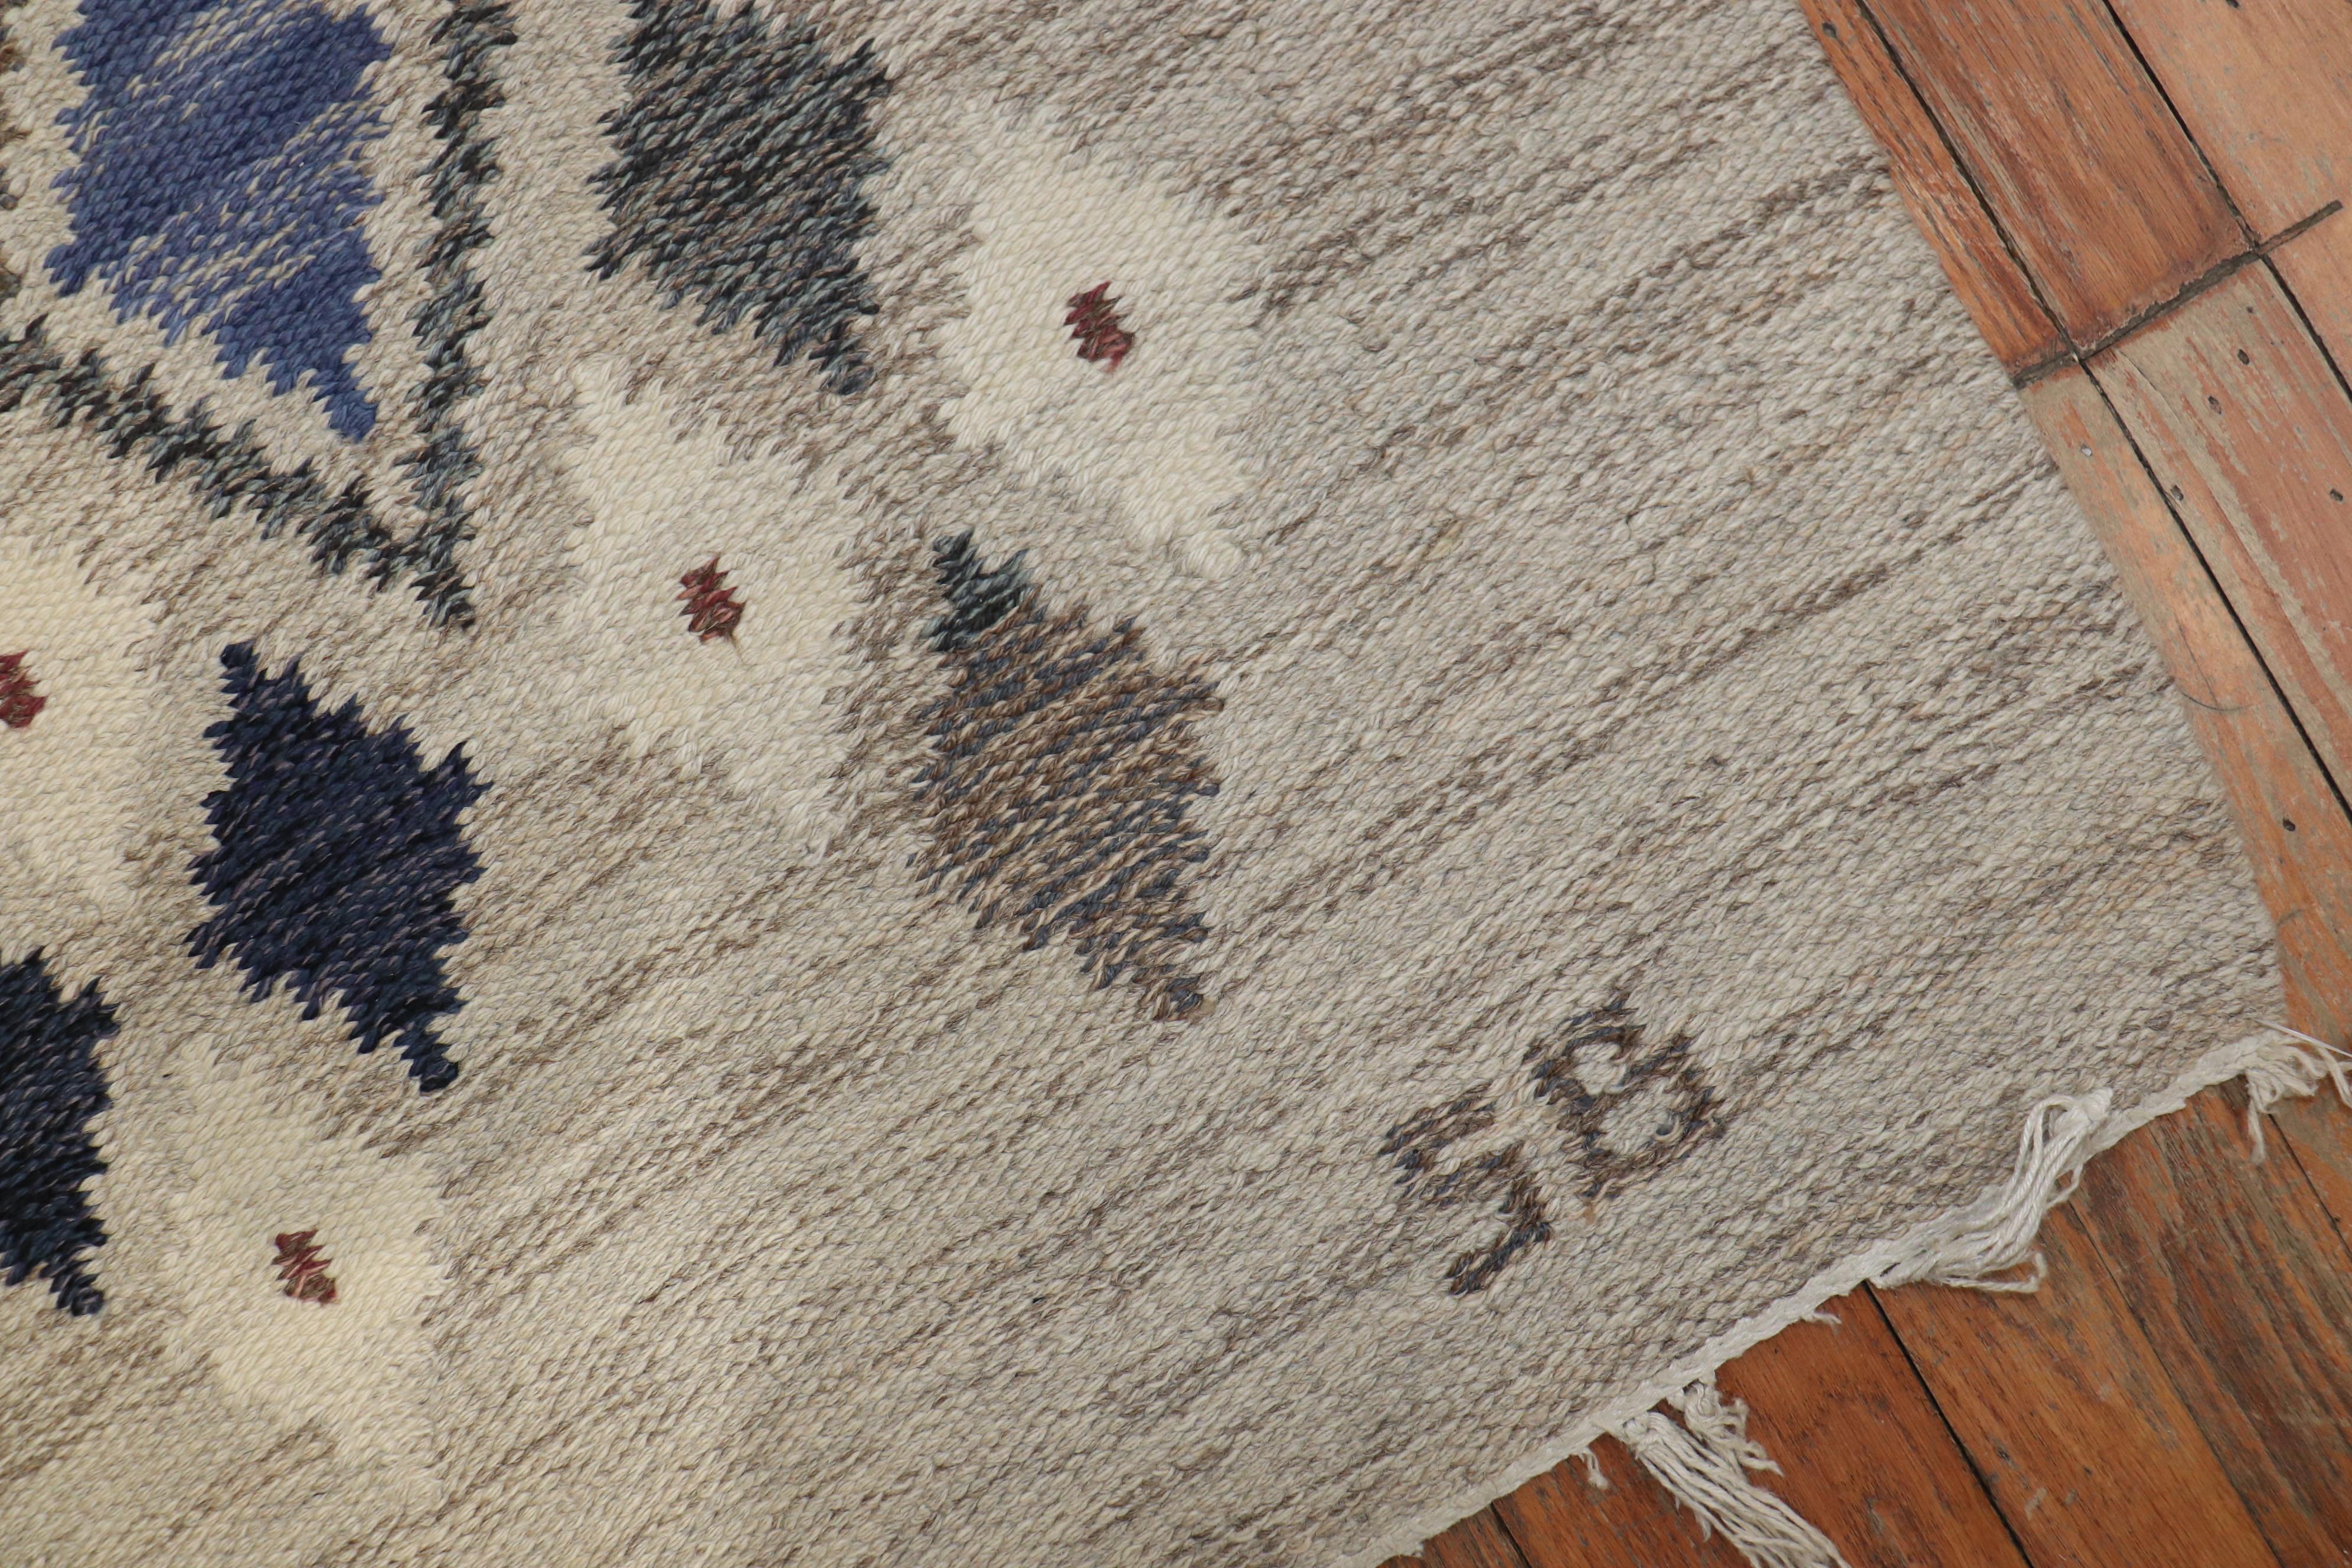 A Swedish flat weave rug with a diamond motif in gray ivory and blue designed by Sigvard Bernadotte. Signed SB Lower Right Corner, circa 1950 

Measures: 7'6'' x 8'4''

Sigvard Bernadotte is best known for his work designing silver for the